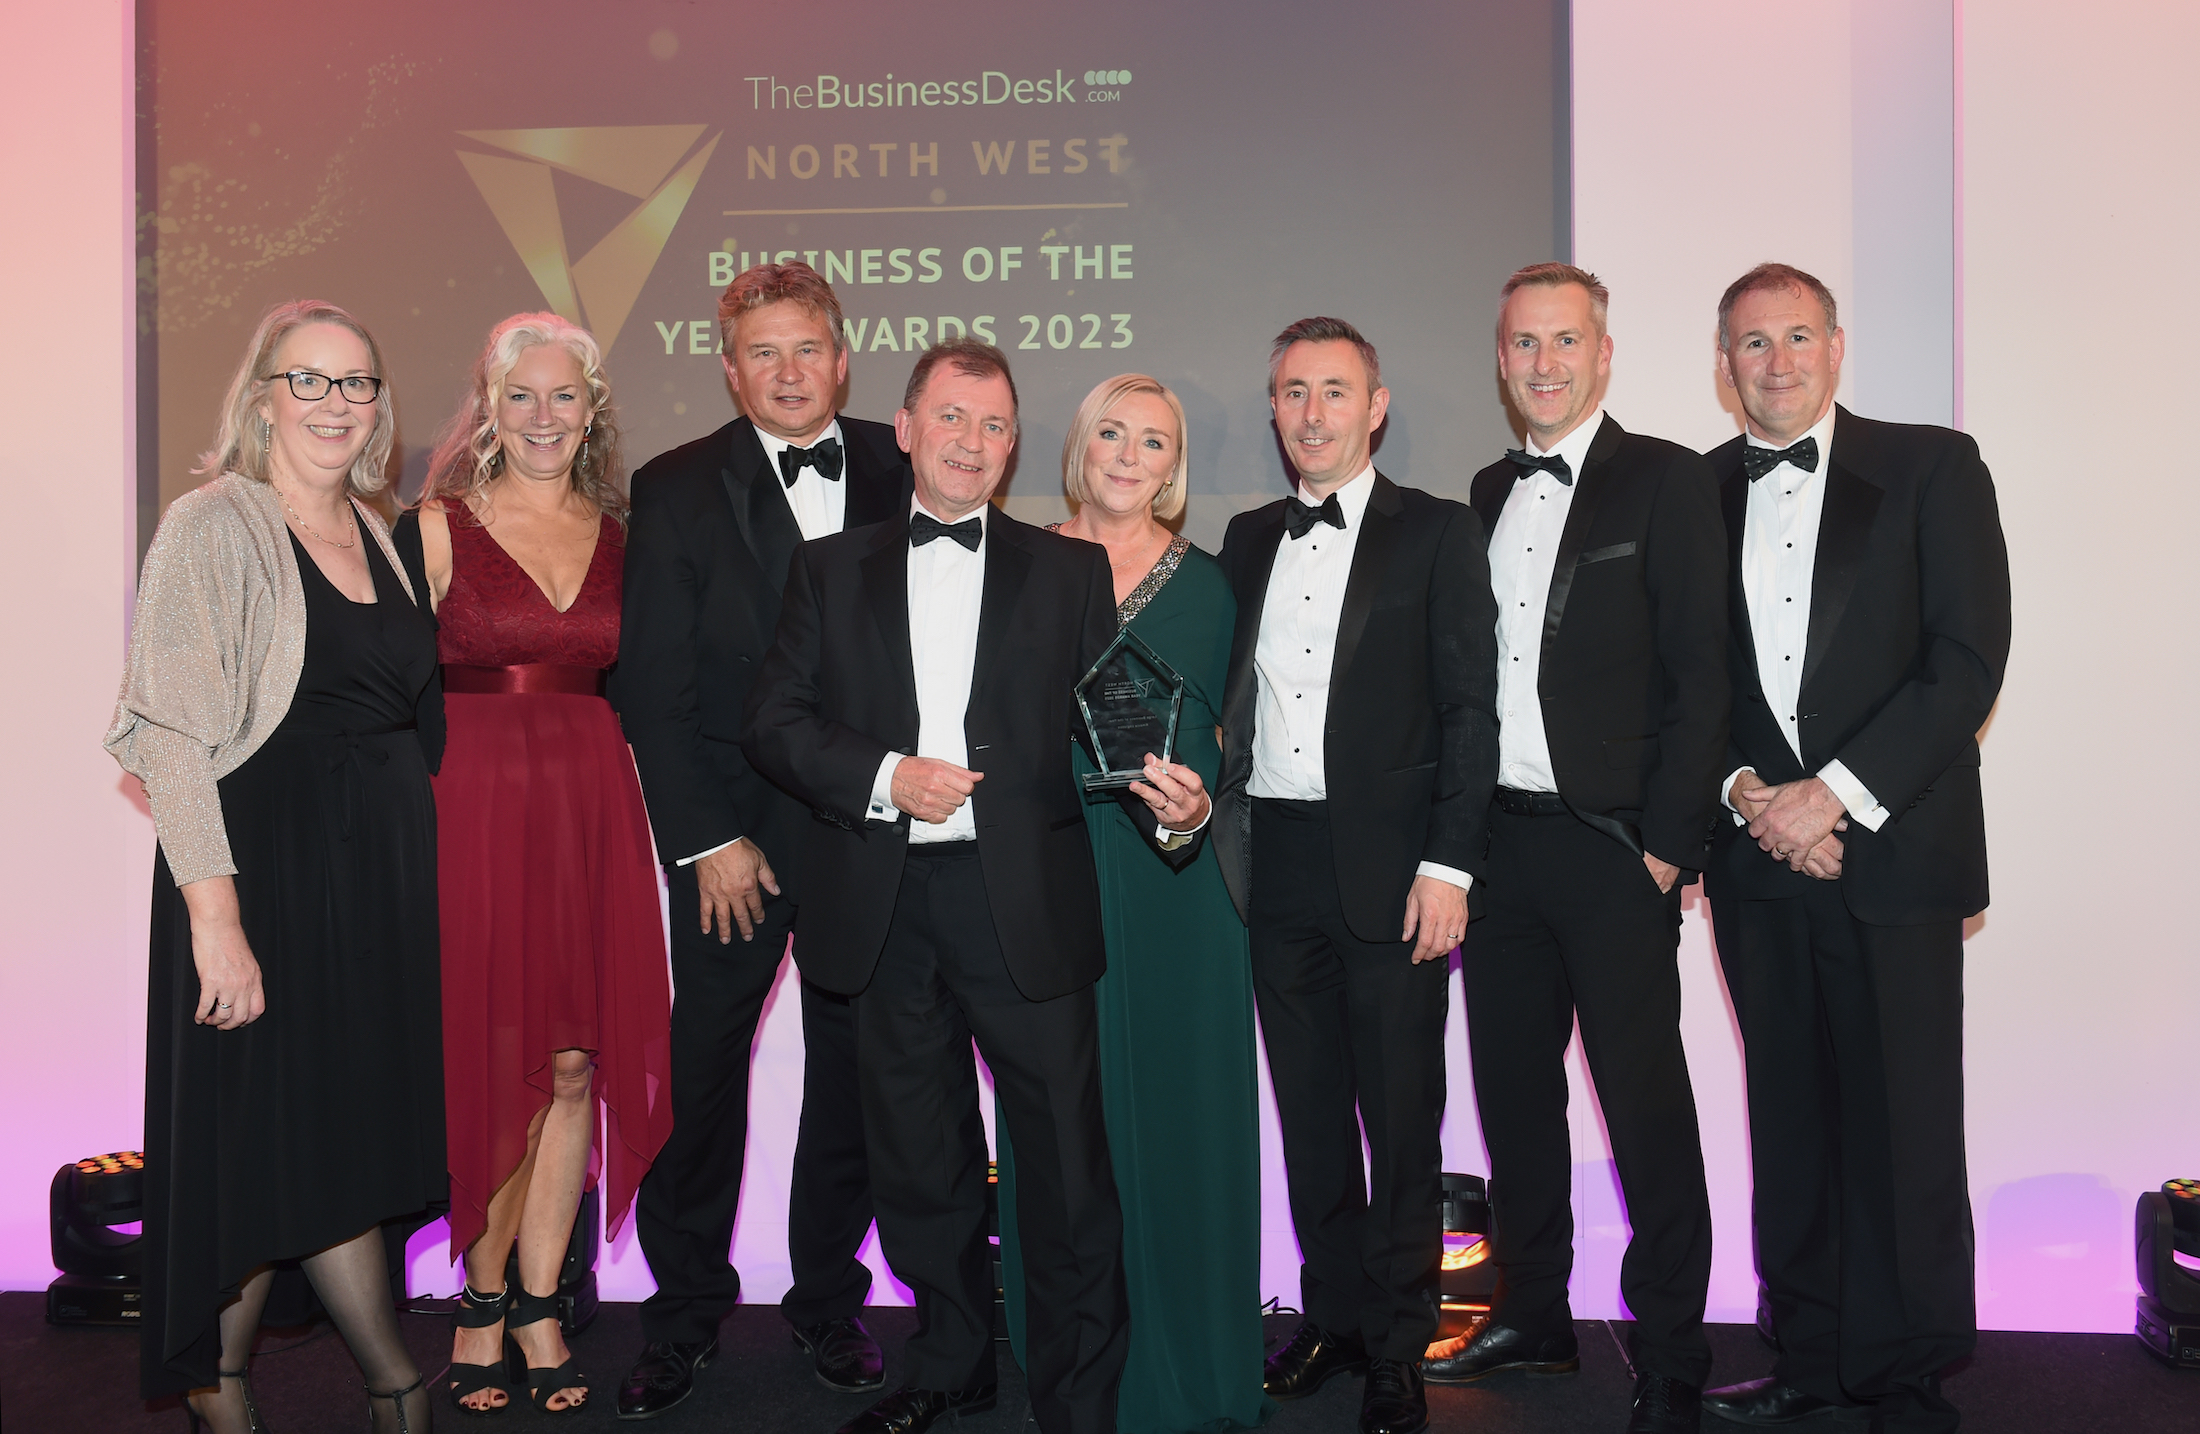 KINAXIA CROWNED BUSINESS OF THE YEAR!